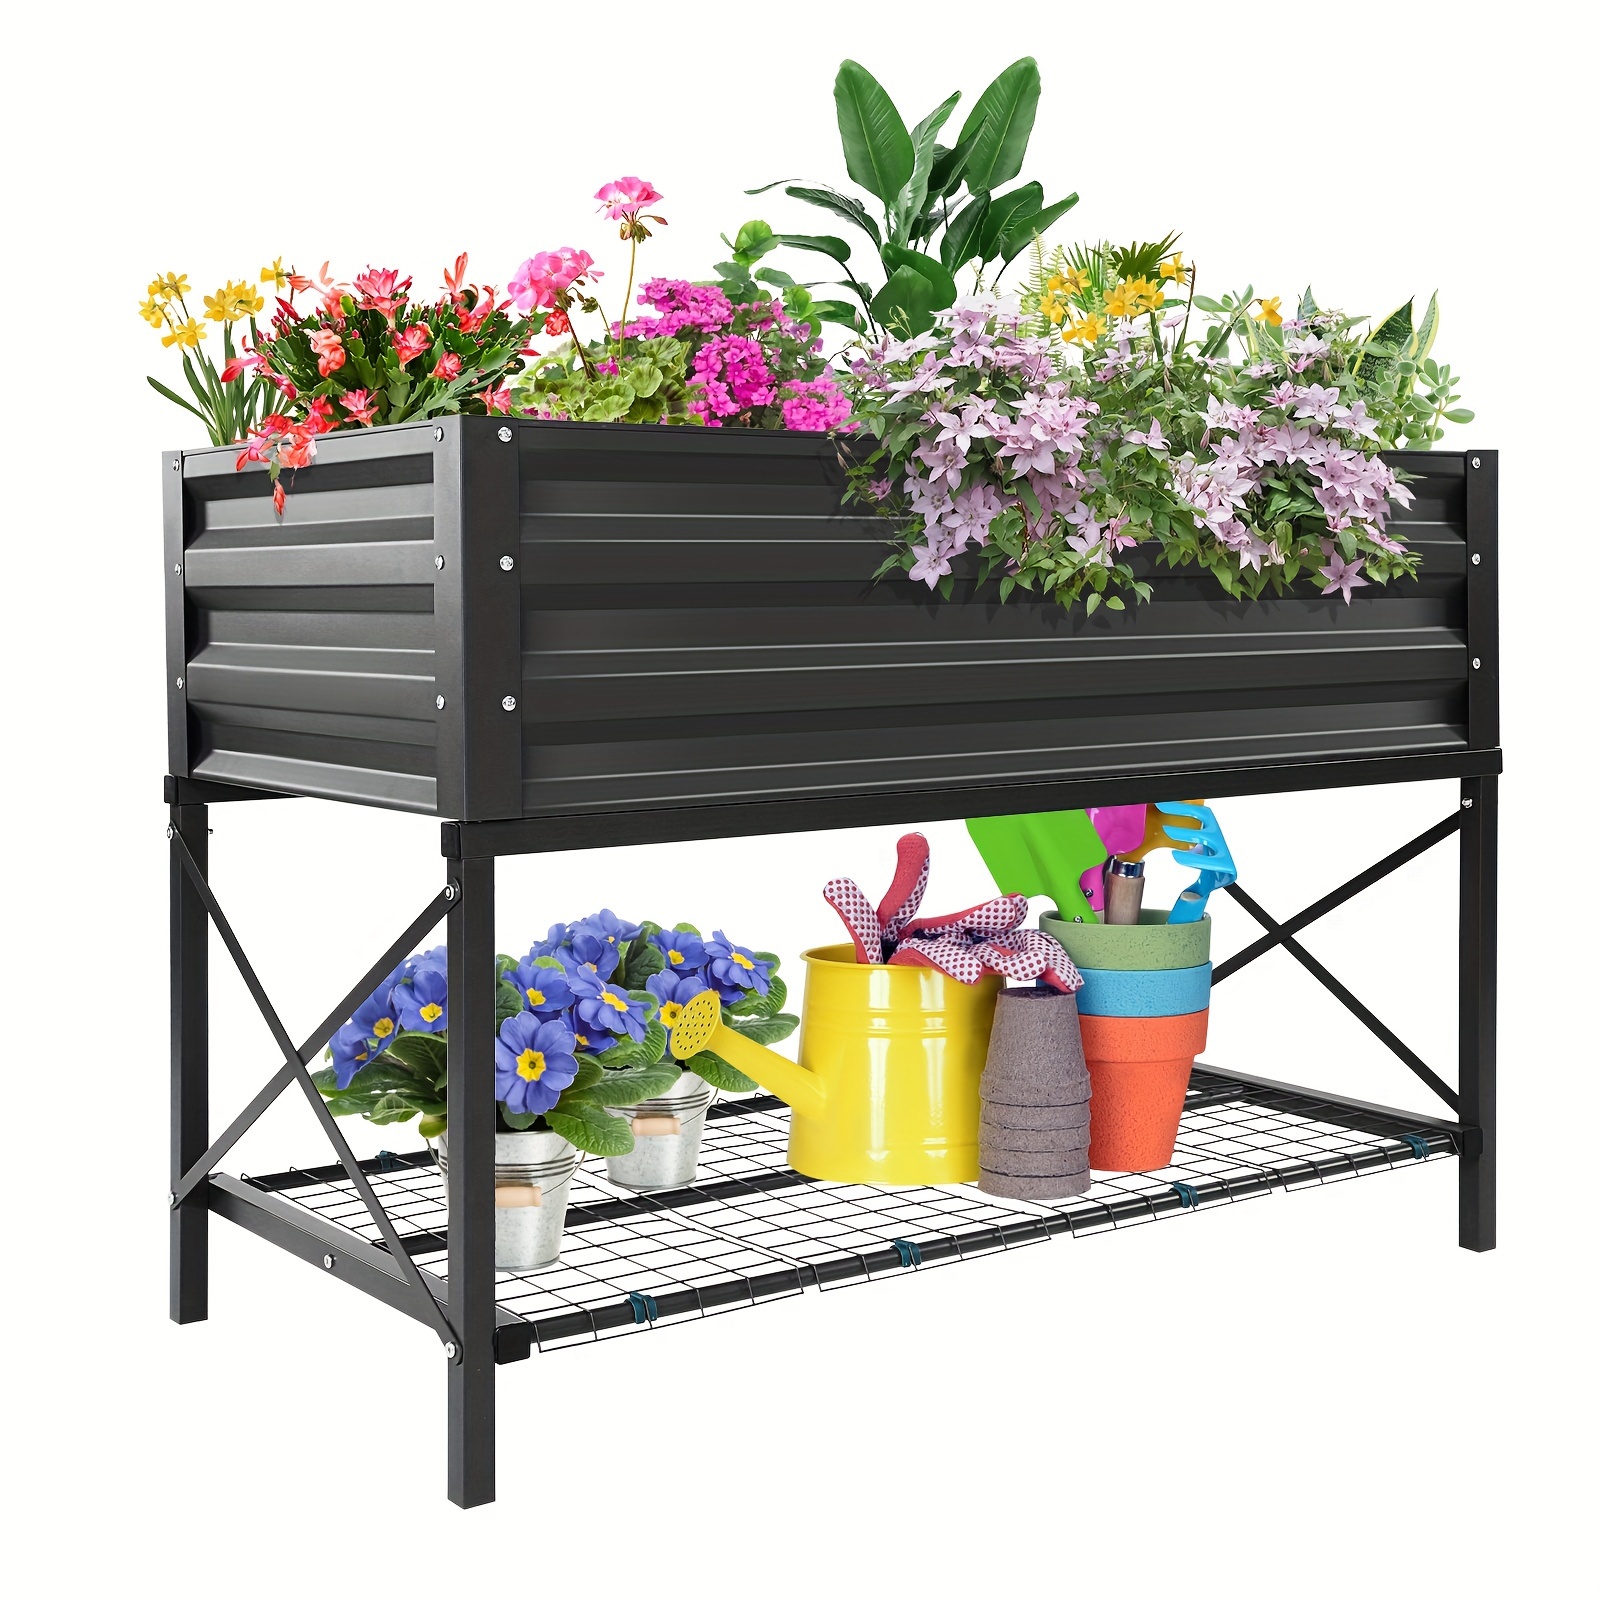 

Galvanized Raised Garden Bed With Legs, 43x22x30 Inch, Outdoor Planters, Large Metal Elevated Raised Planter Box For Backyard, Patio, Balcony - Black, Brown